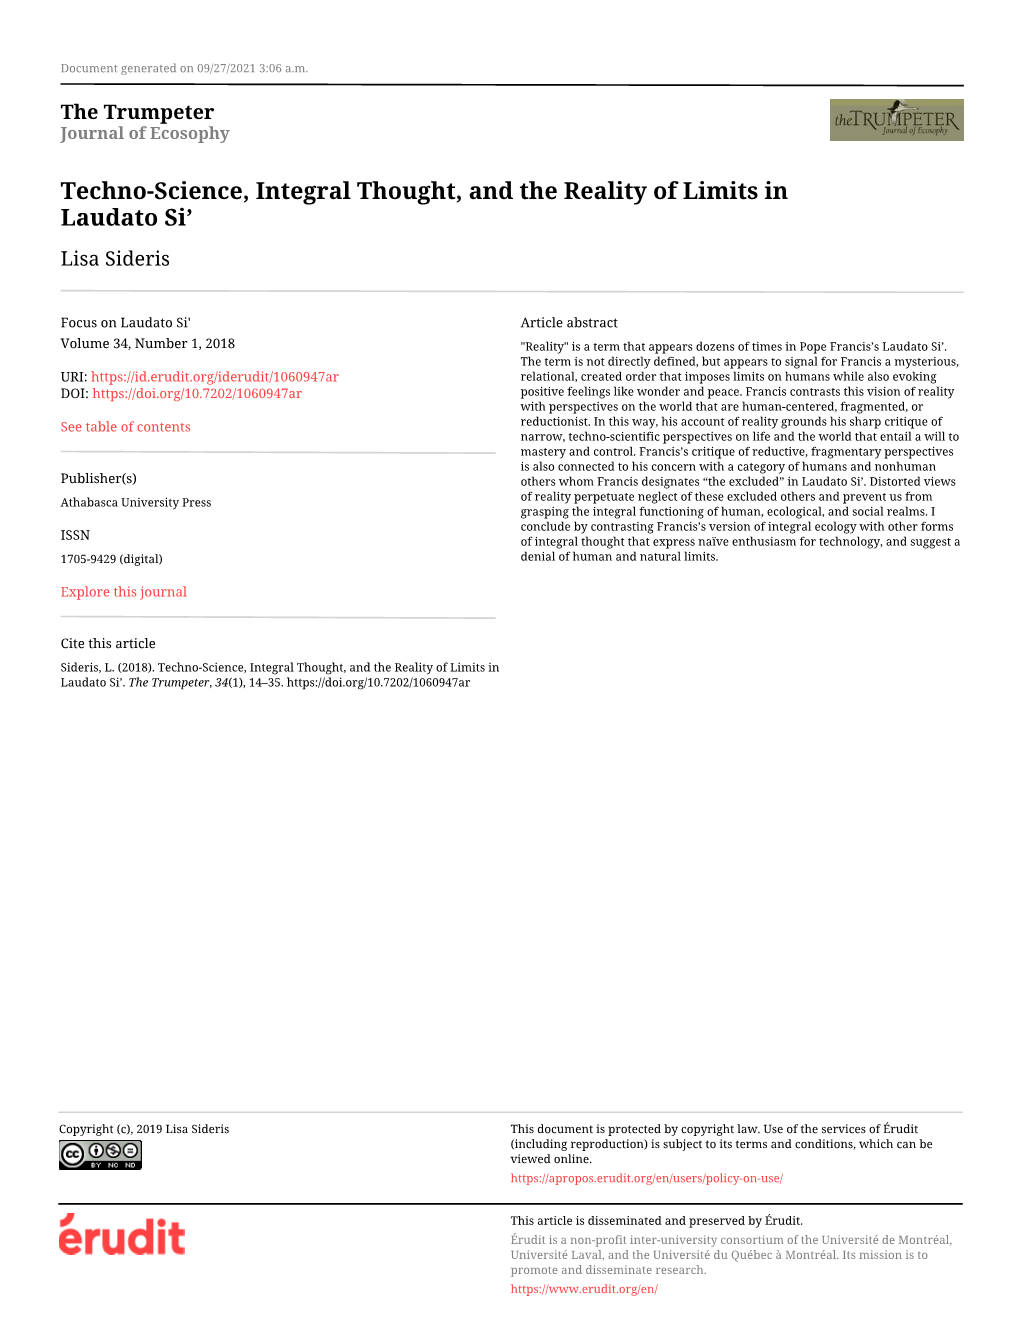 Techno-Science, Integral Thought, and the Reality of Limits in Laudato Si’ Lisa Sideris